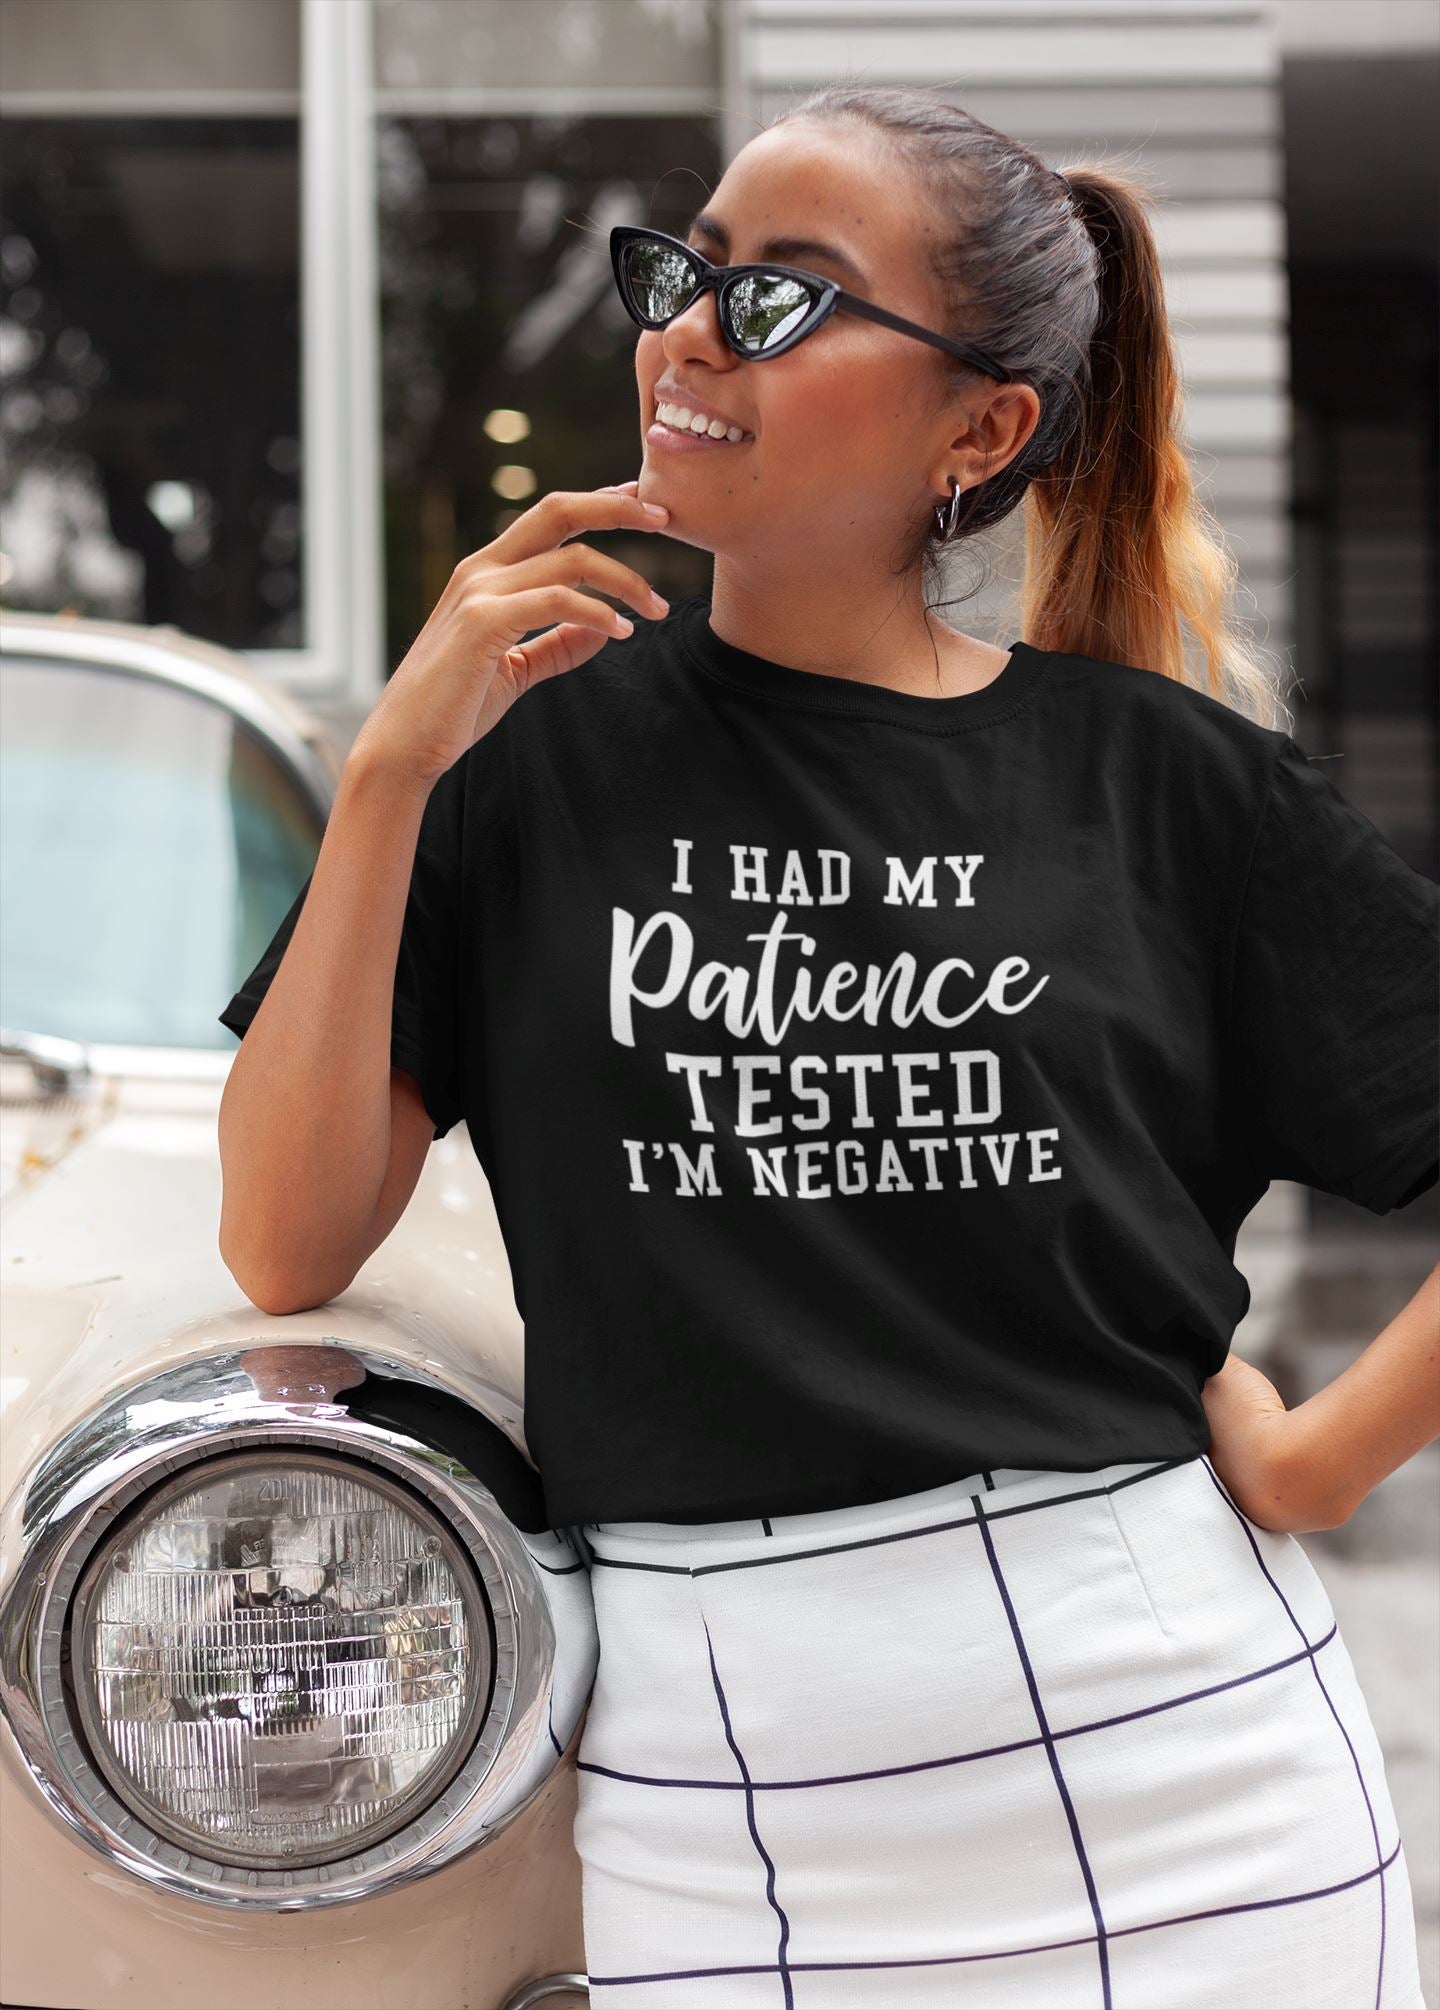 Had My Patience Tested I'm Negative Funny T-Shirt, Sarcasti – B1ack By Design